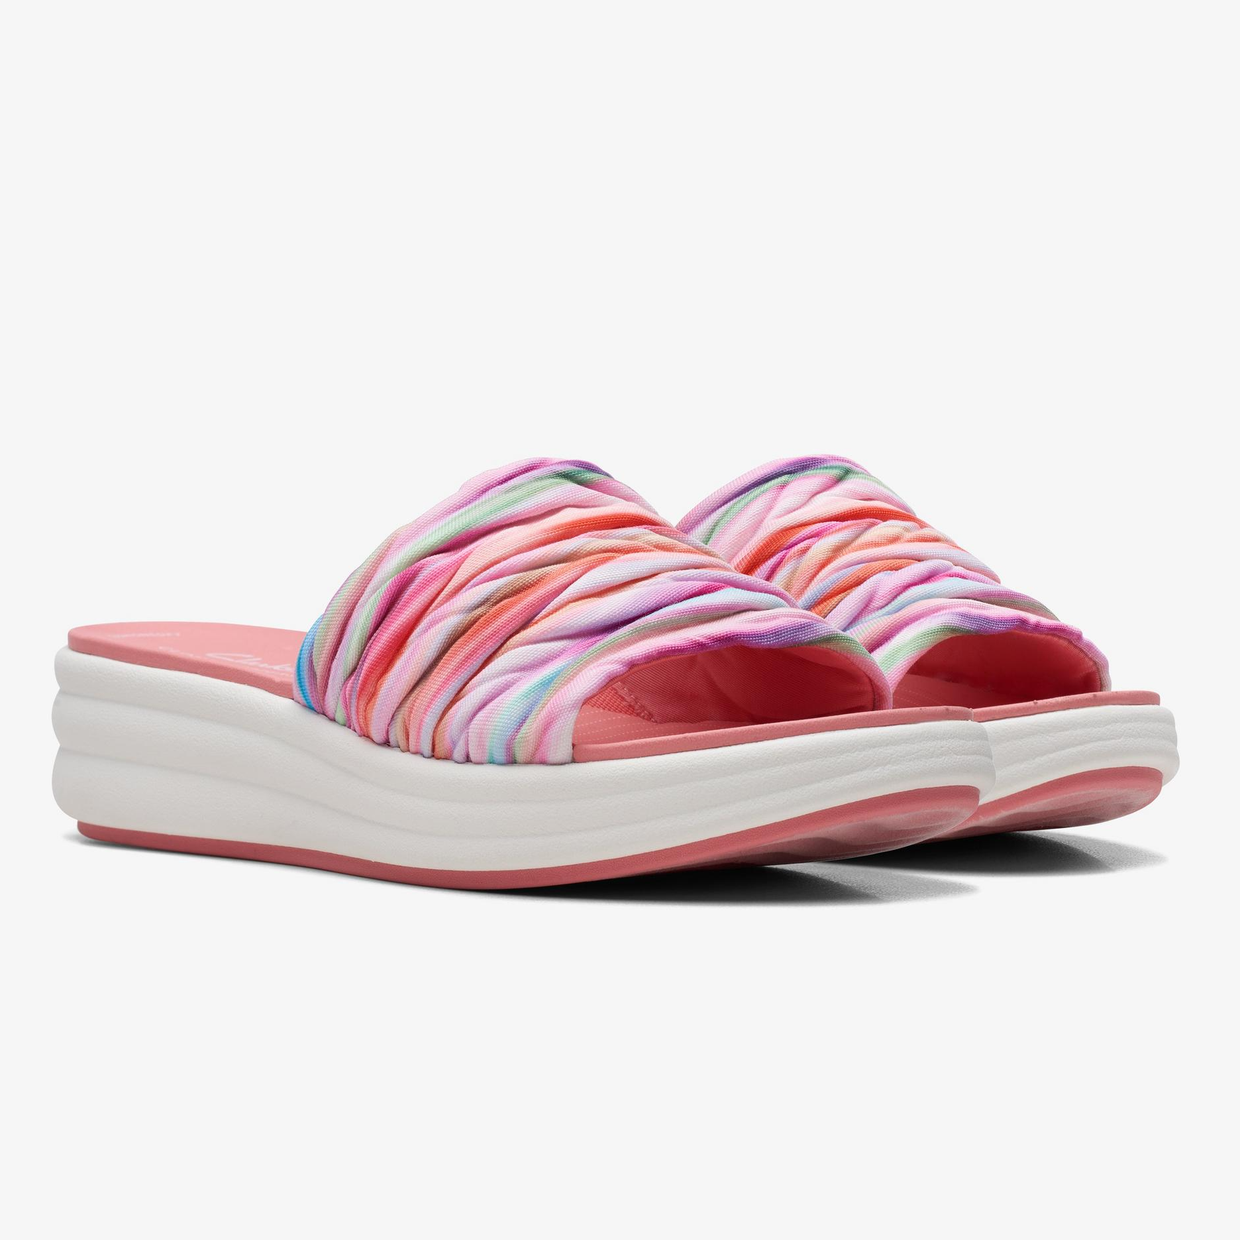 A pair of colorful striped platform sandals with a pink sole.